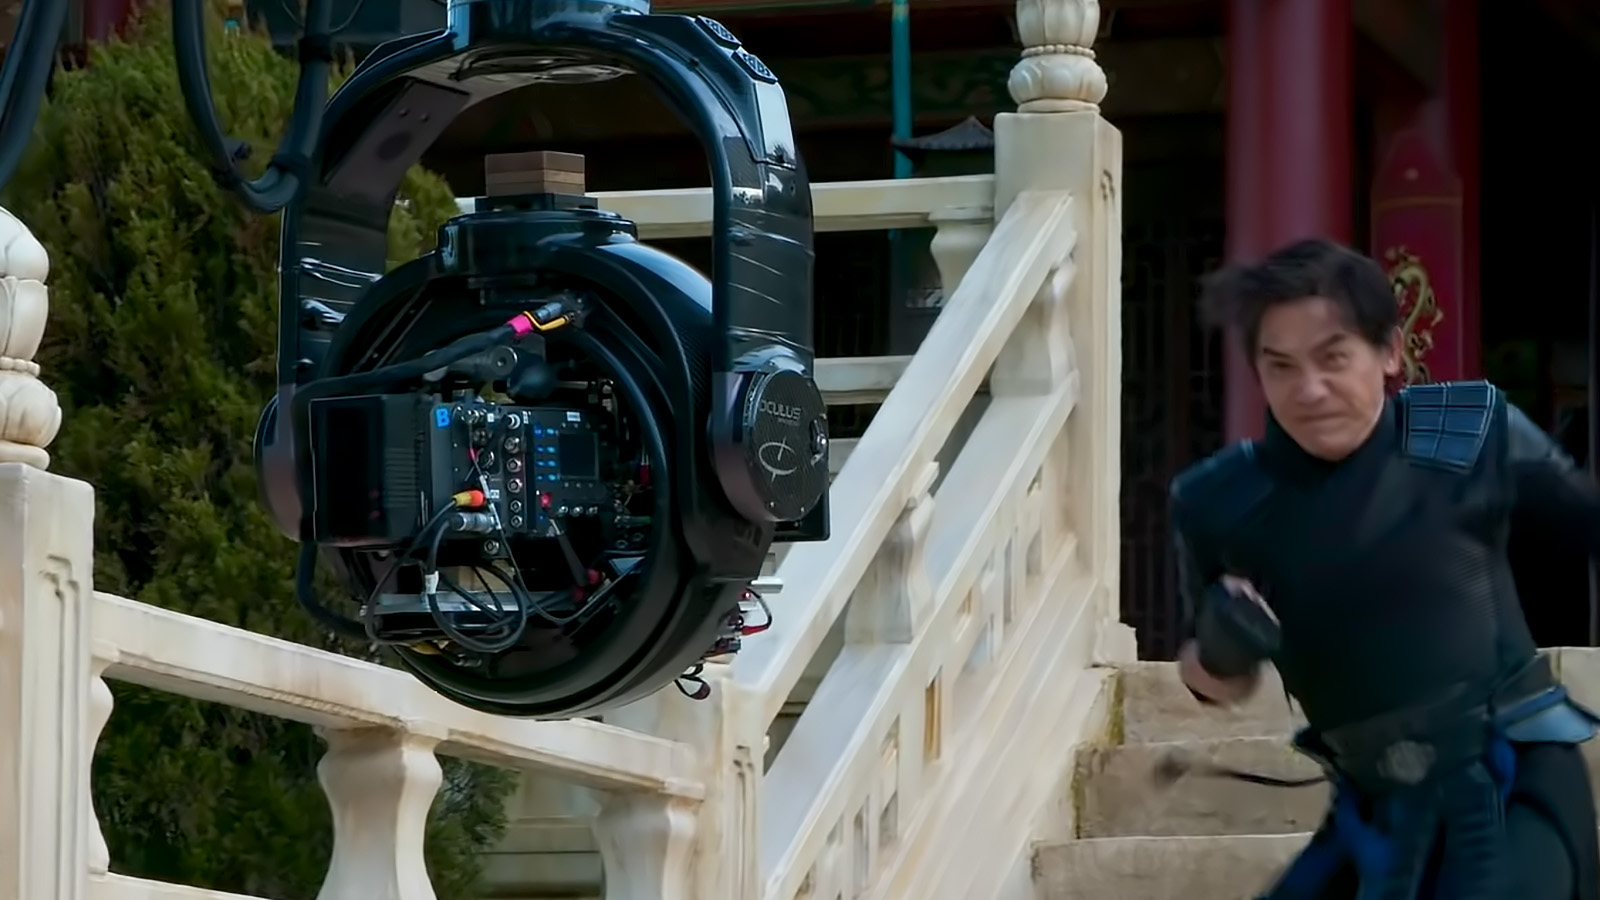 Crane-mounted Alexa 65 LF capturing the action in Shang-Chi.